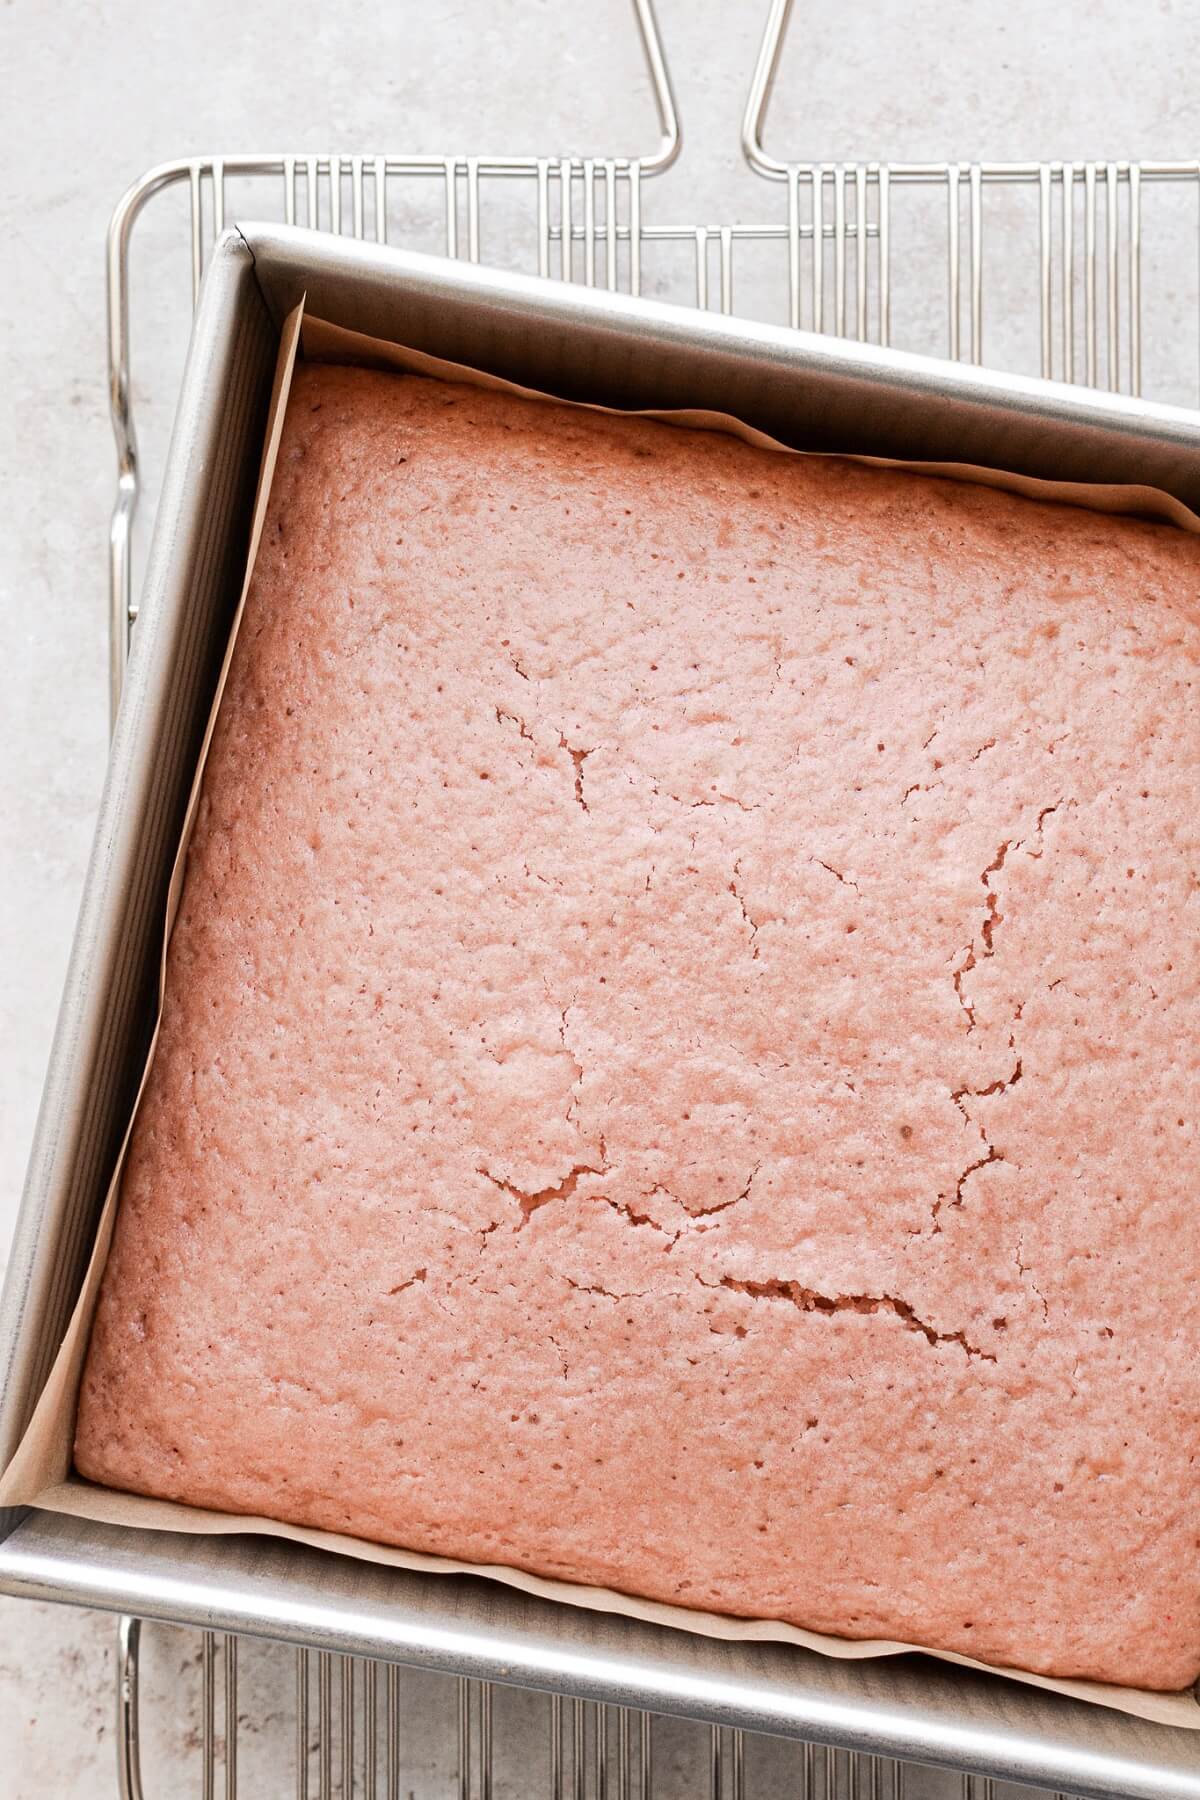 Baked strawberry cake in a baking pan.